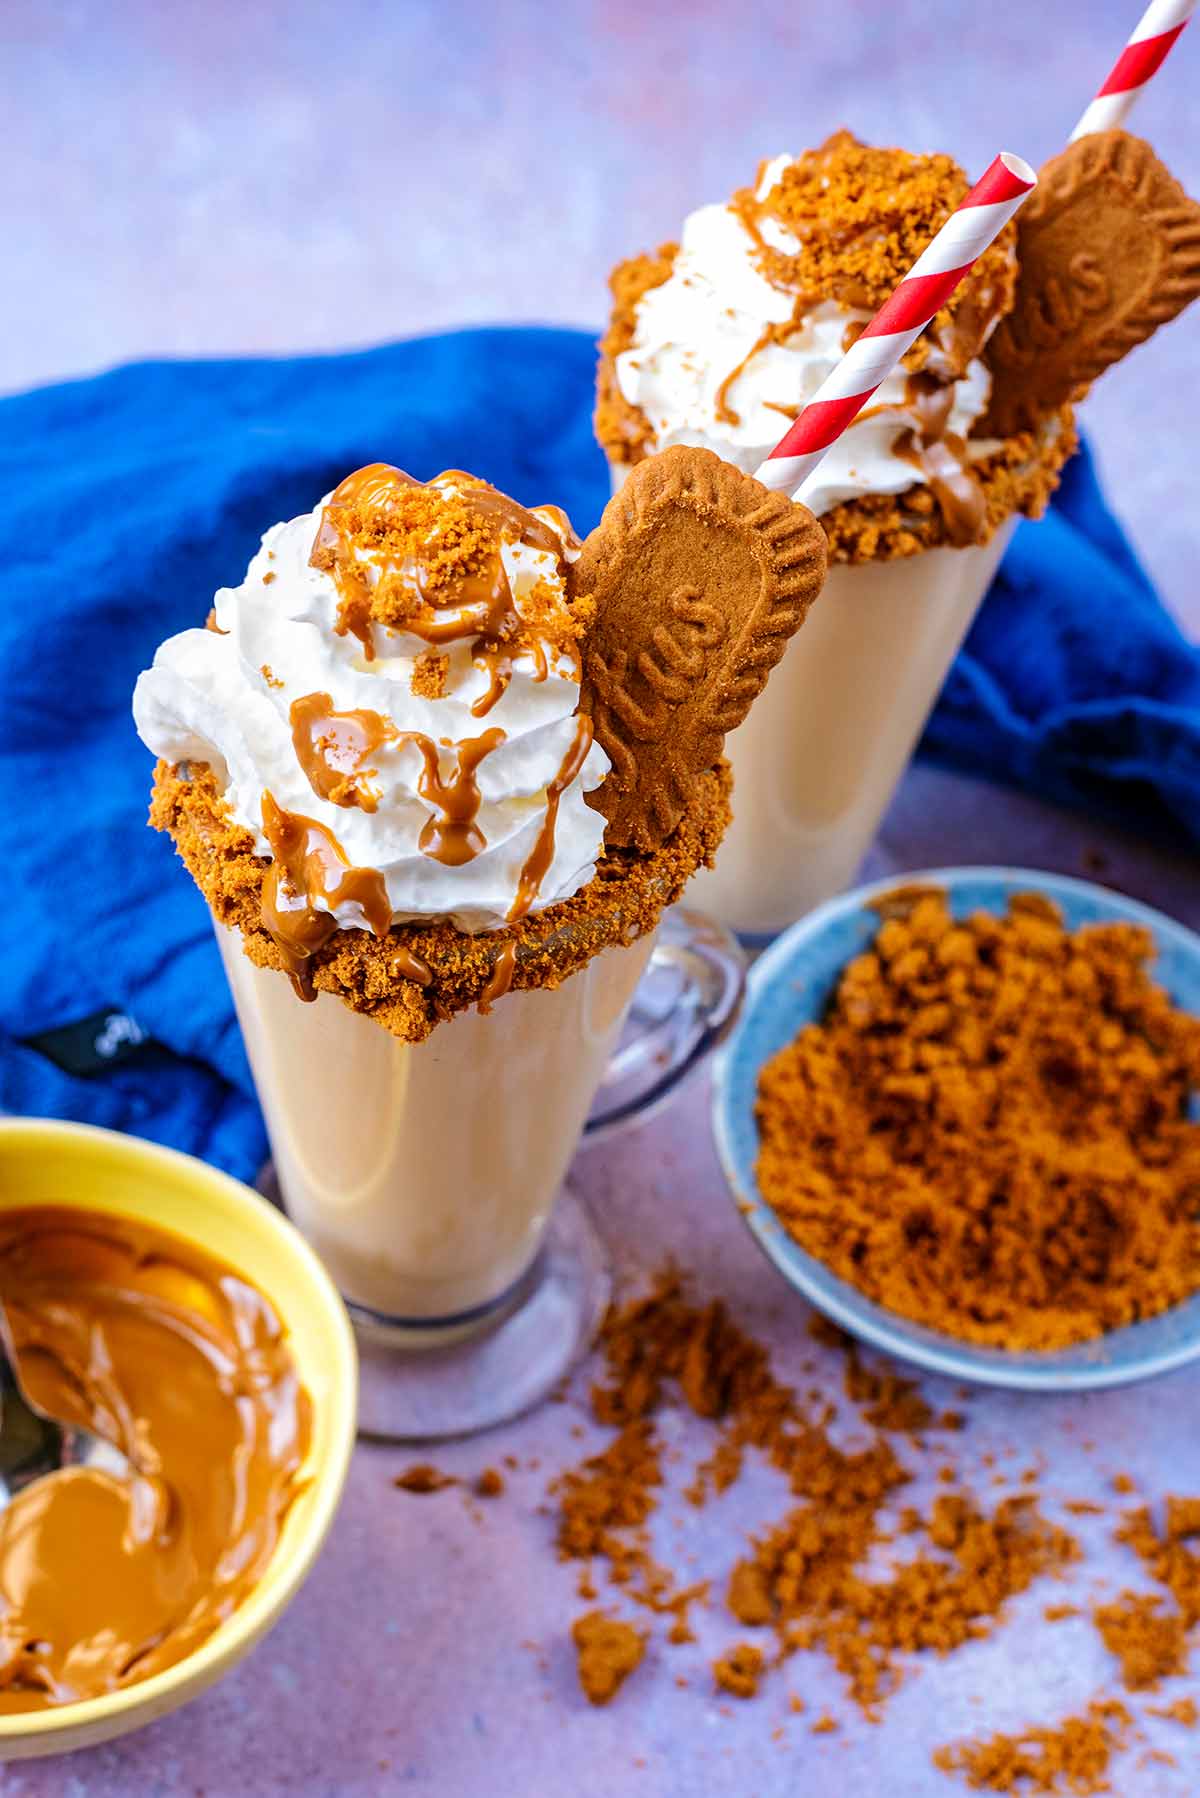 Two Biscoff milkshakes next to a bowl od Biscoff spread and crushed Lotus biscuits.